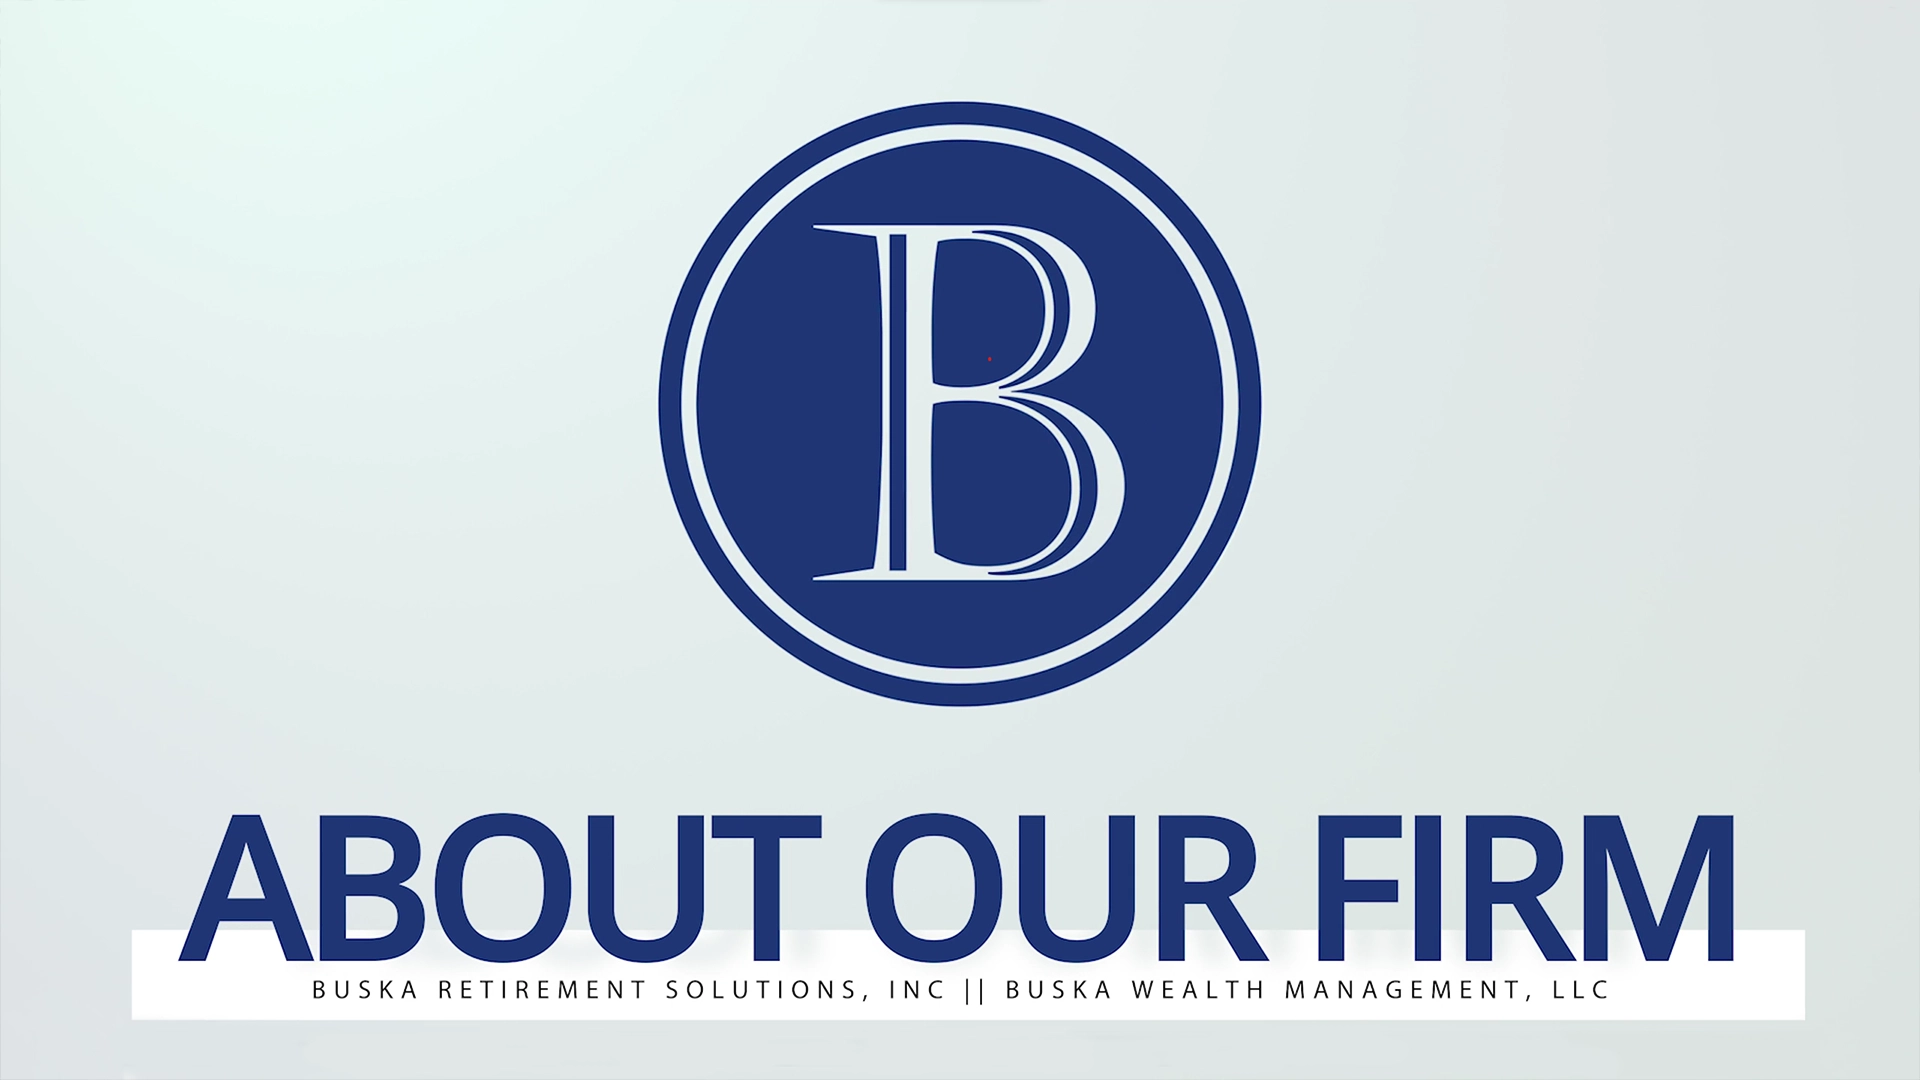 Wausau WI Buska Retirement Solutions About Our Firm